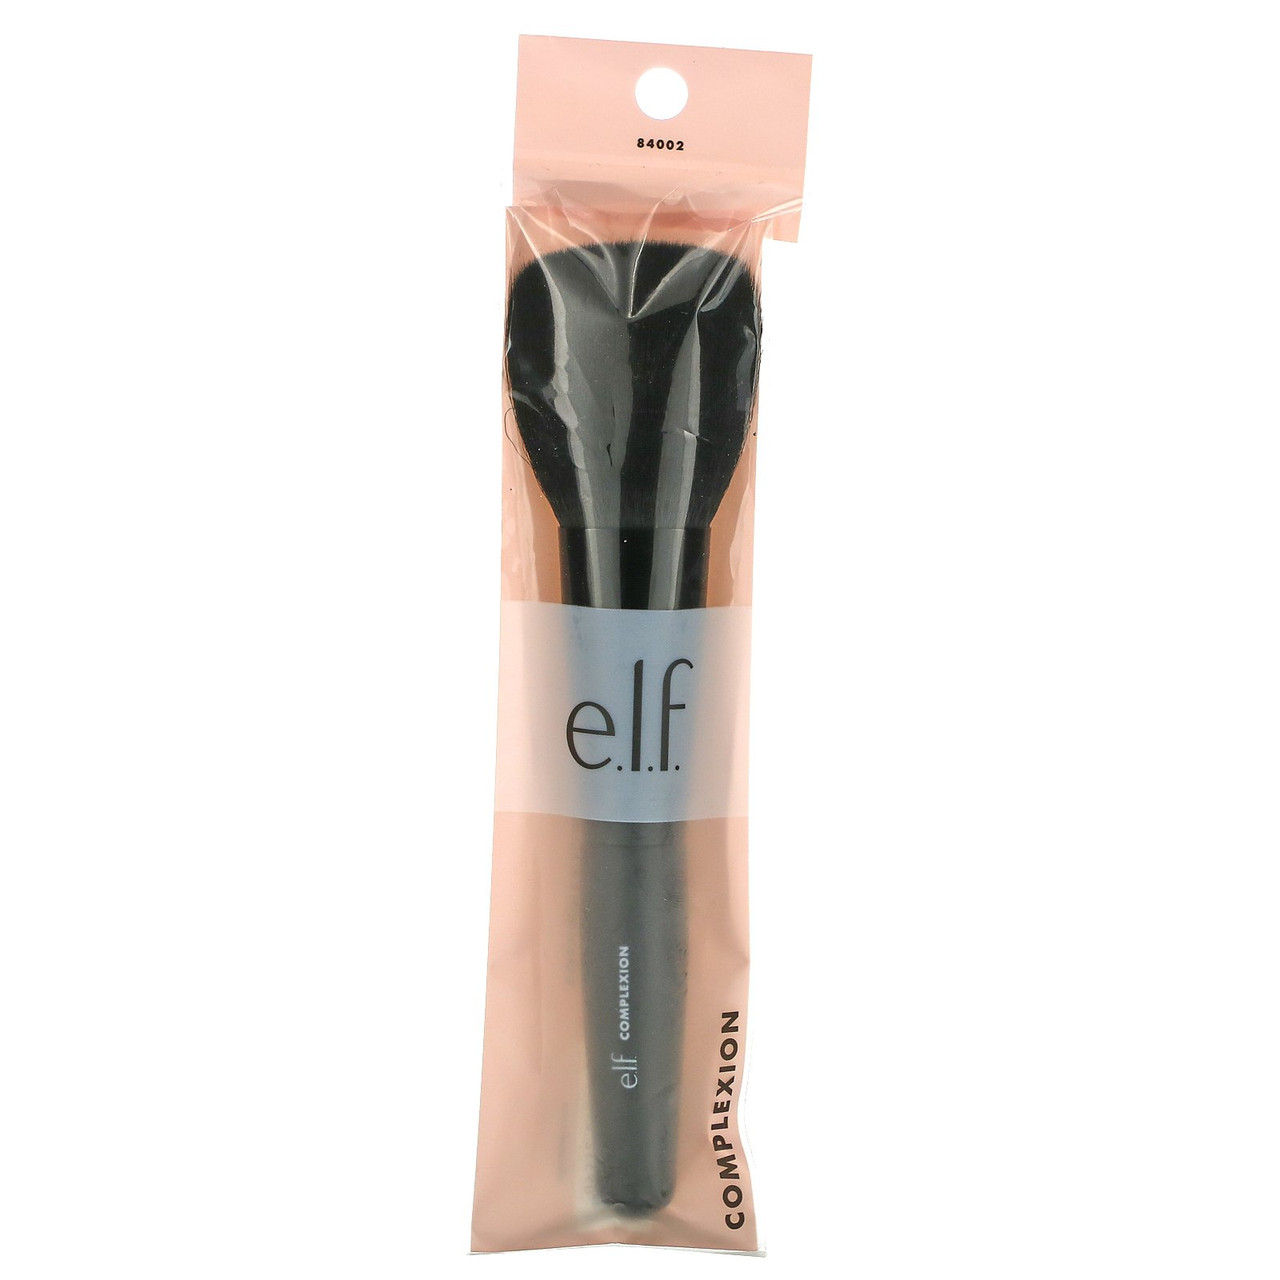 Buy E.l.f. Complexion Brush online, UK delivery